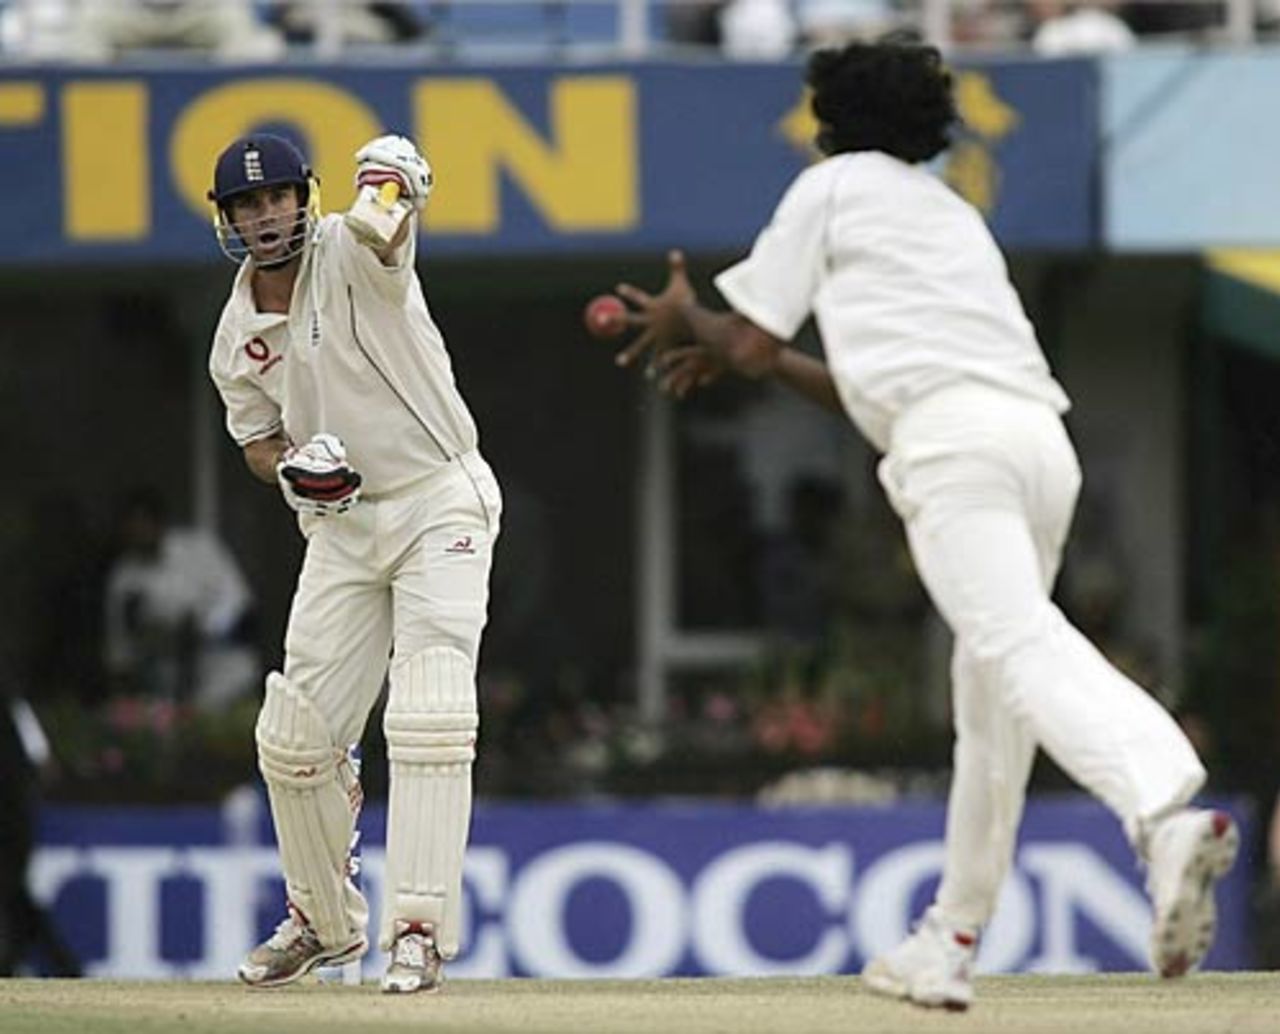 Kevin Pietersen chips a return catch to Munaf Patel as India claimed a vital wicket just before bad light stopped play, India v England, 2nd Test, Mohali, March 9, 2006